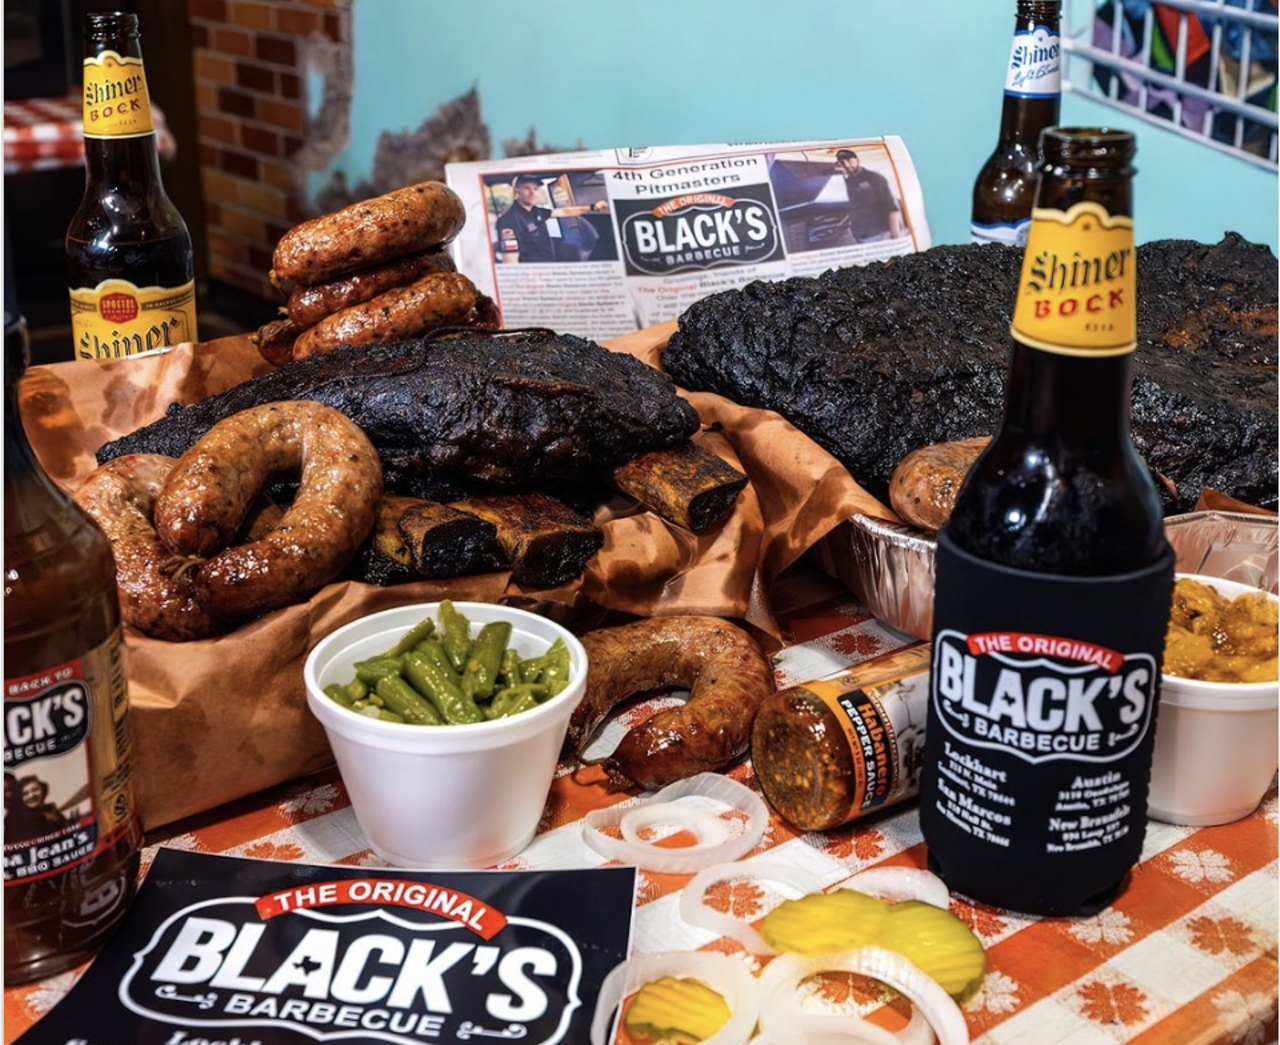 Black’s Barbecue
215 N. Main Street, Lockhart, (512) 398-2712, blacksbbq.com
Black’s Barbecue applies generations of barbecue knowledge to cook up brisket, sausage, turkey, beef ribs, chopped beef and pork ribs. You've got to go for all the flavors, like jalapeño sausage and sweet cream corn.
Photo via Instagram / blacksbbq